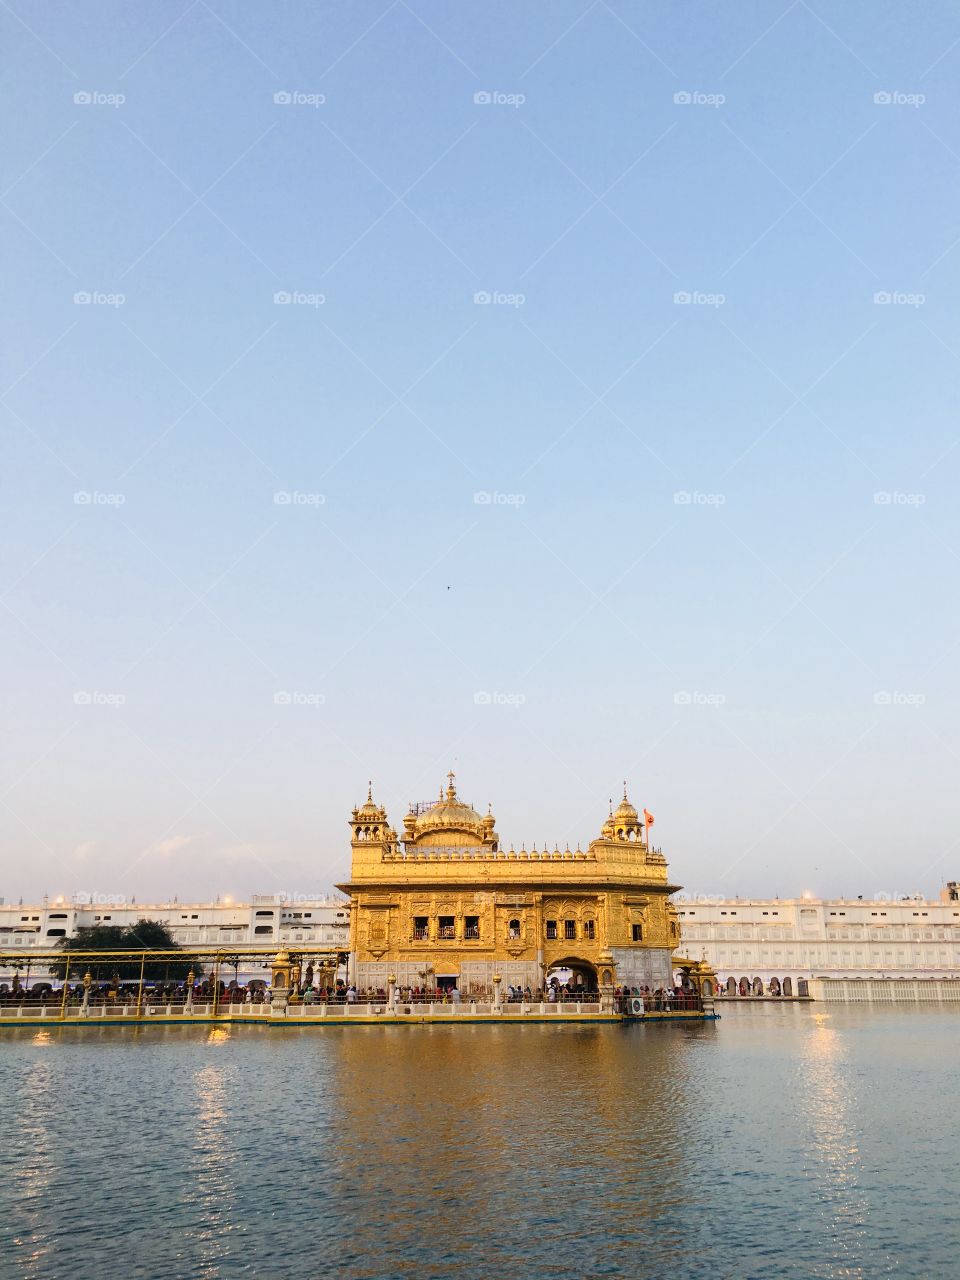 Golden temple amritsar .. sach a beutyful and peaceful palace in punjab (india) everyone should go in onetime 